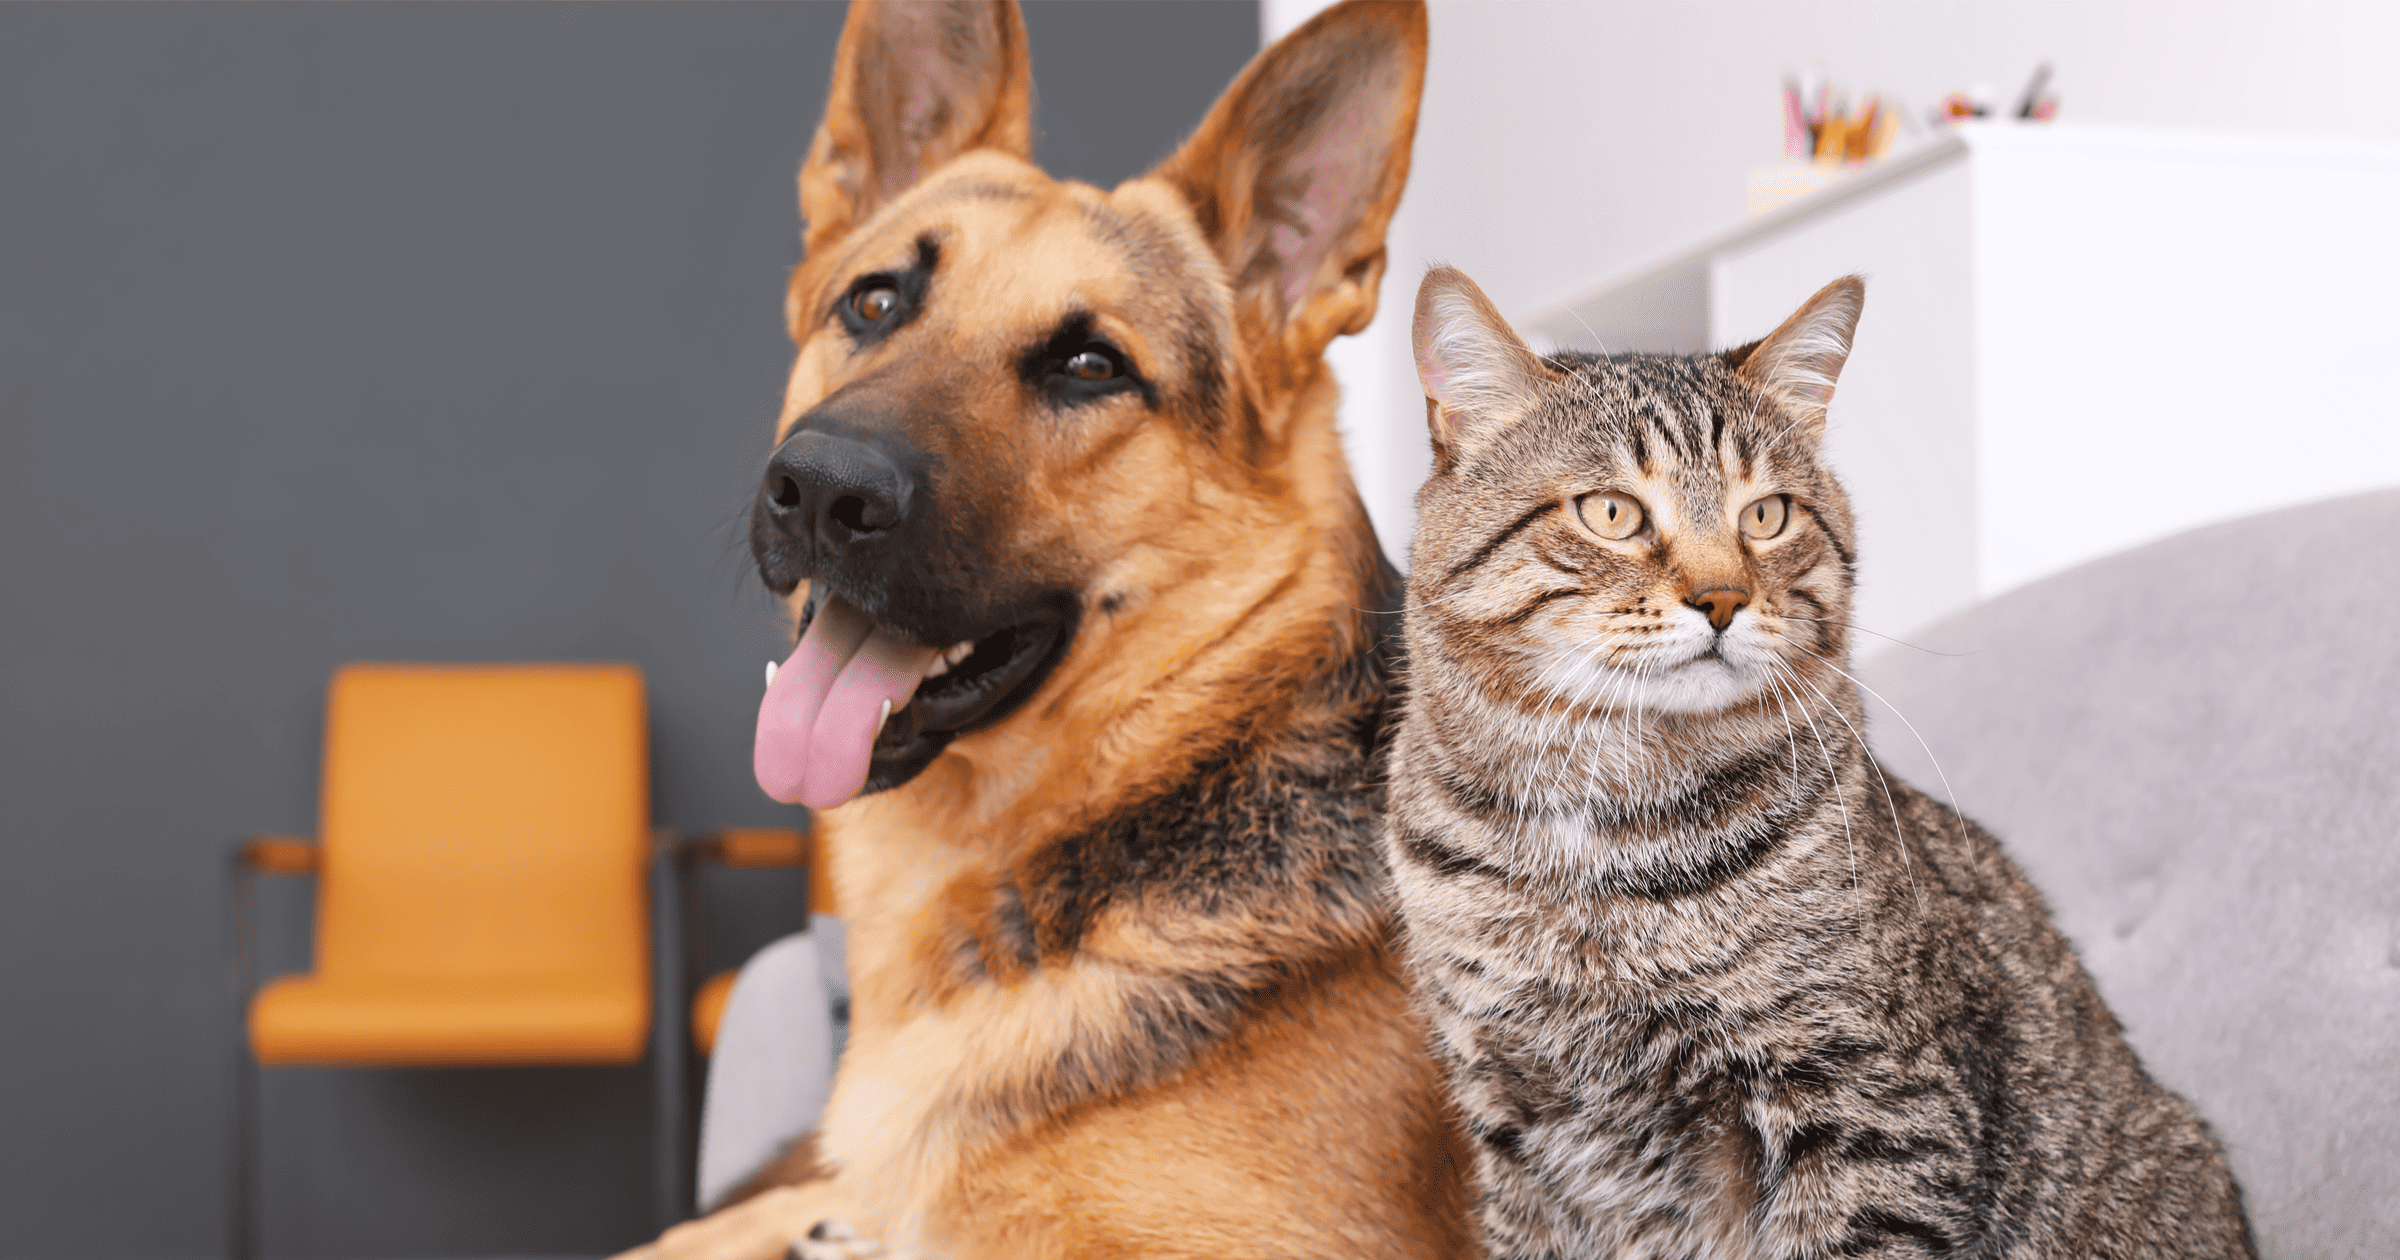 Collagen for Dogs & Cats: What Are The Benefits?